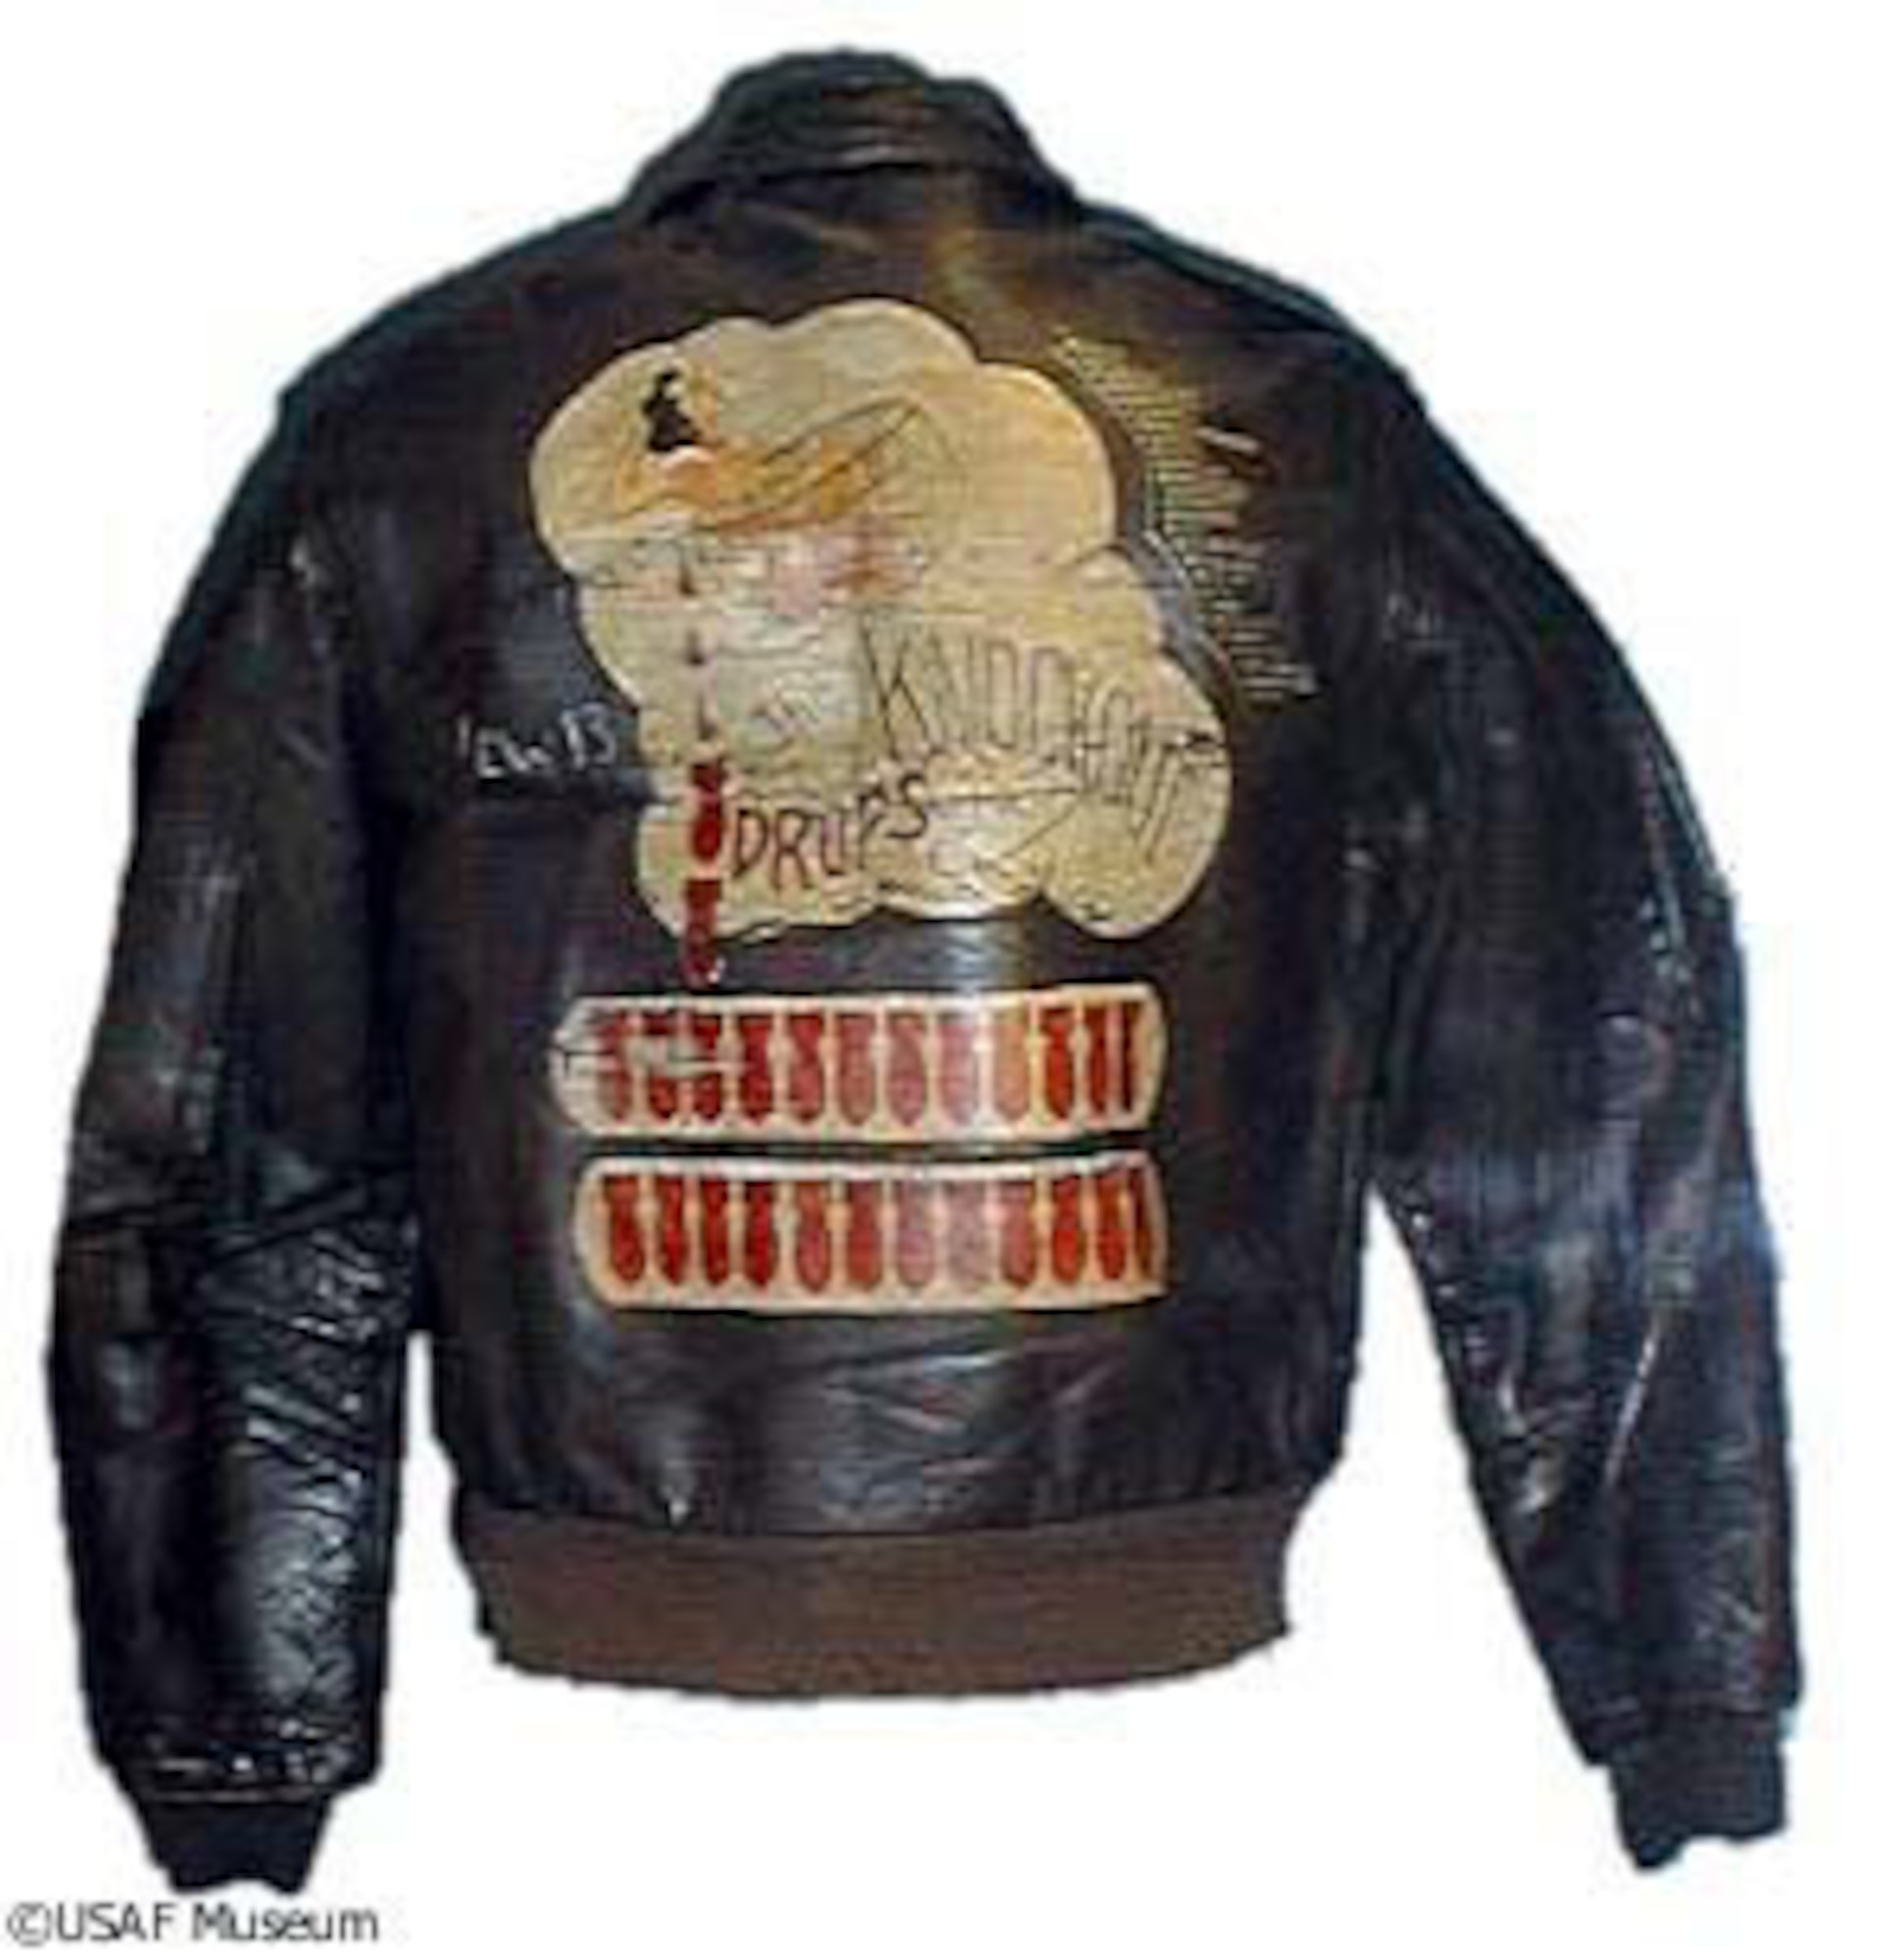 DAYTON, Ohio -- "The Knockout Drops" aviator jacket on display at the National Museum of the United States Air Force. (U.S. Air Force photo)